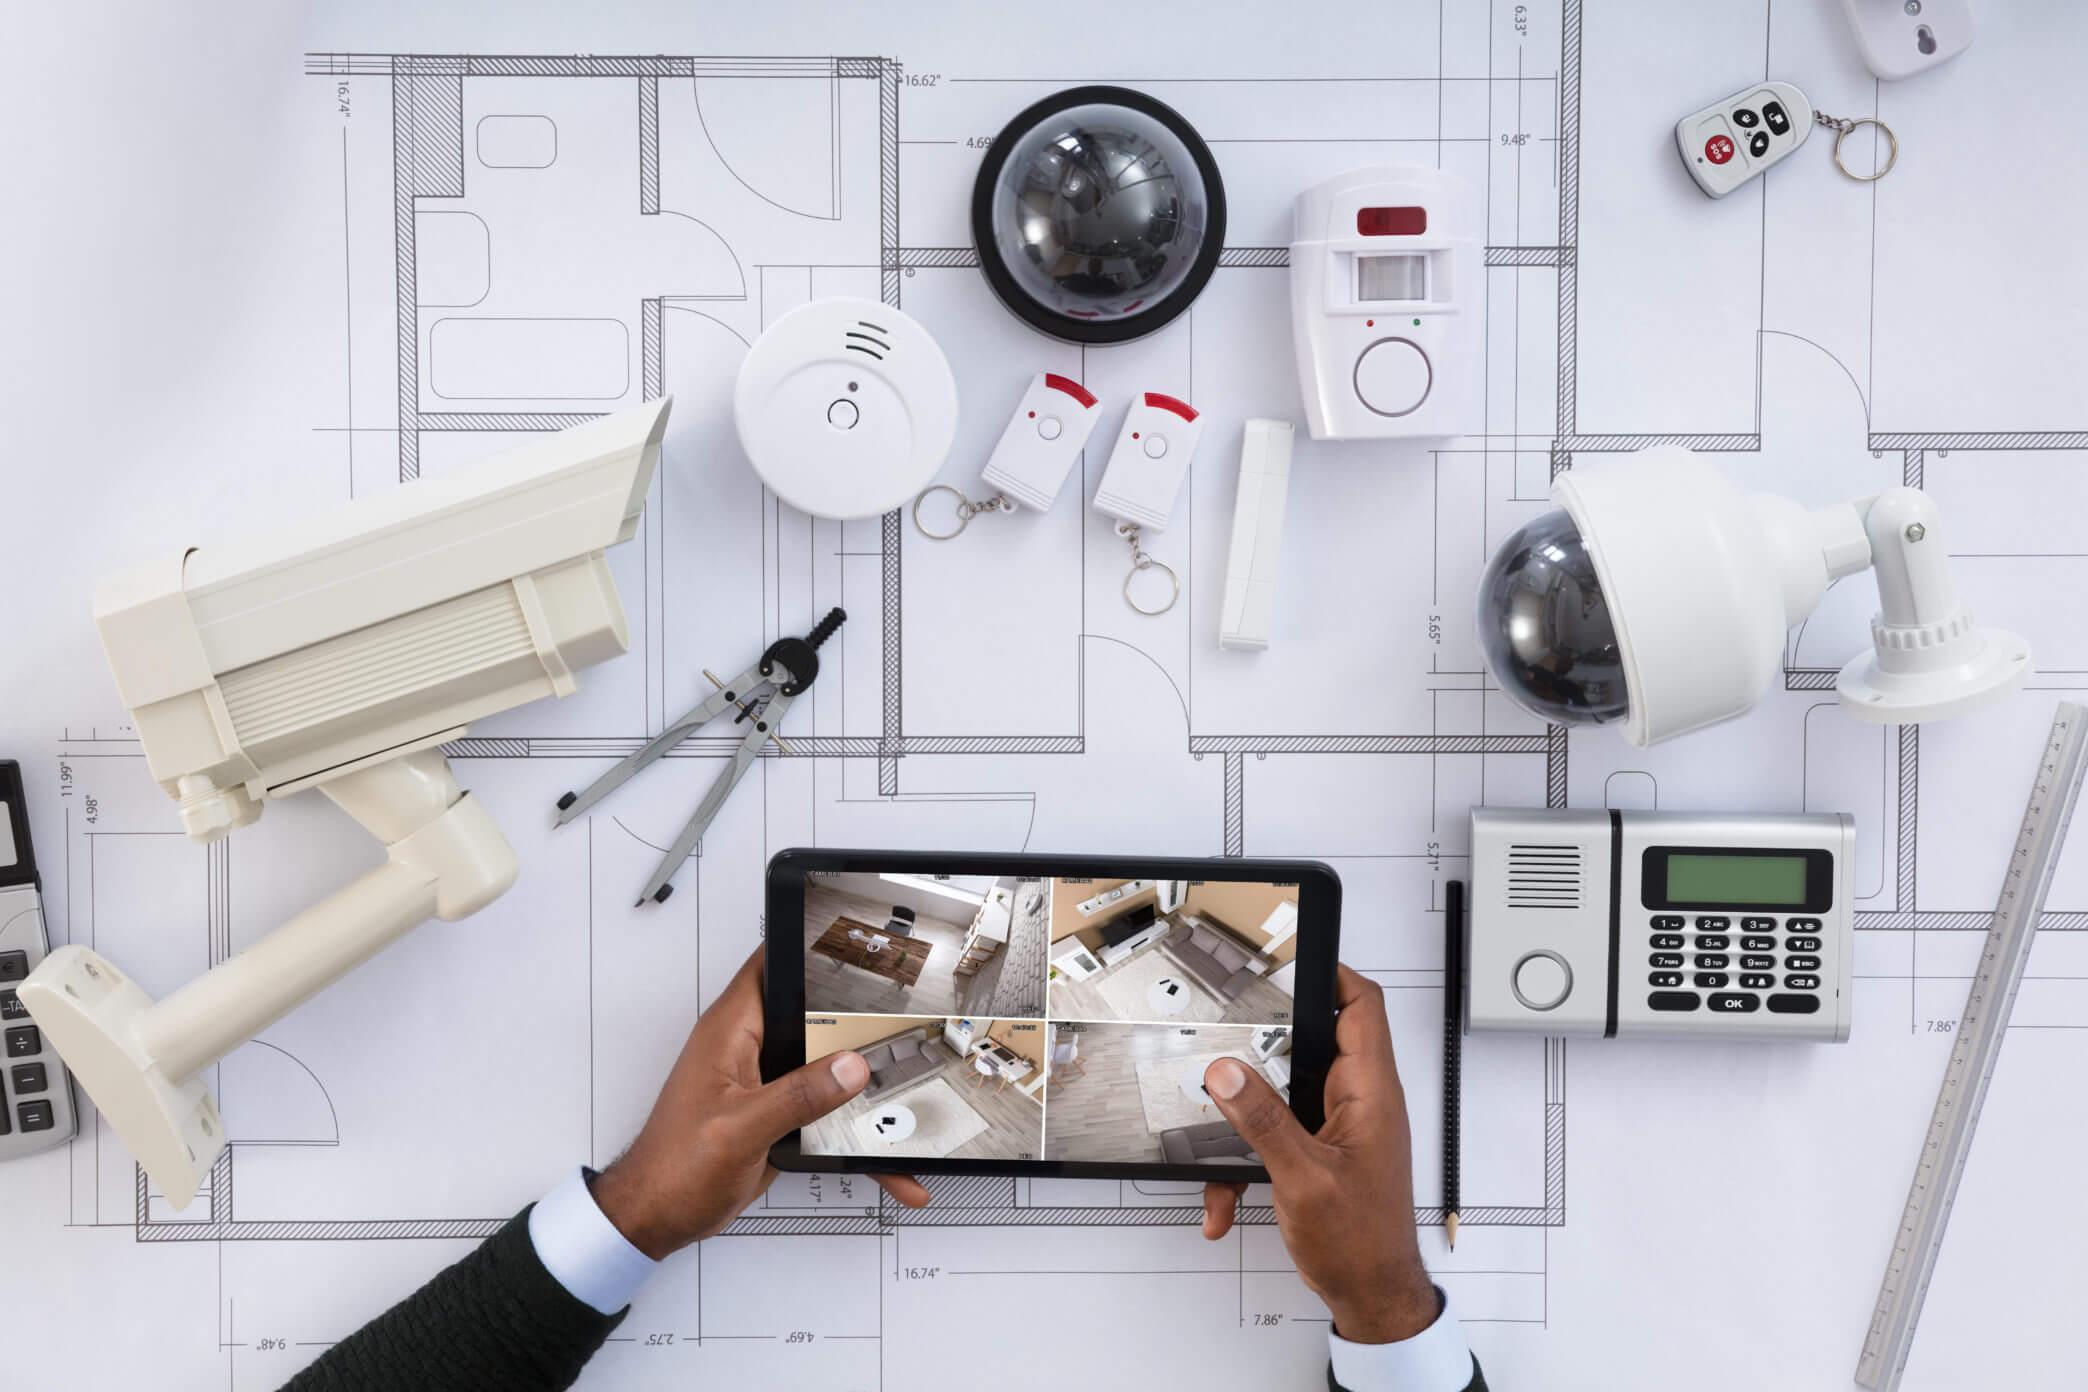 How To Design Home Security System